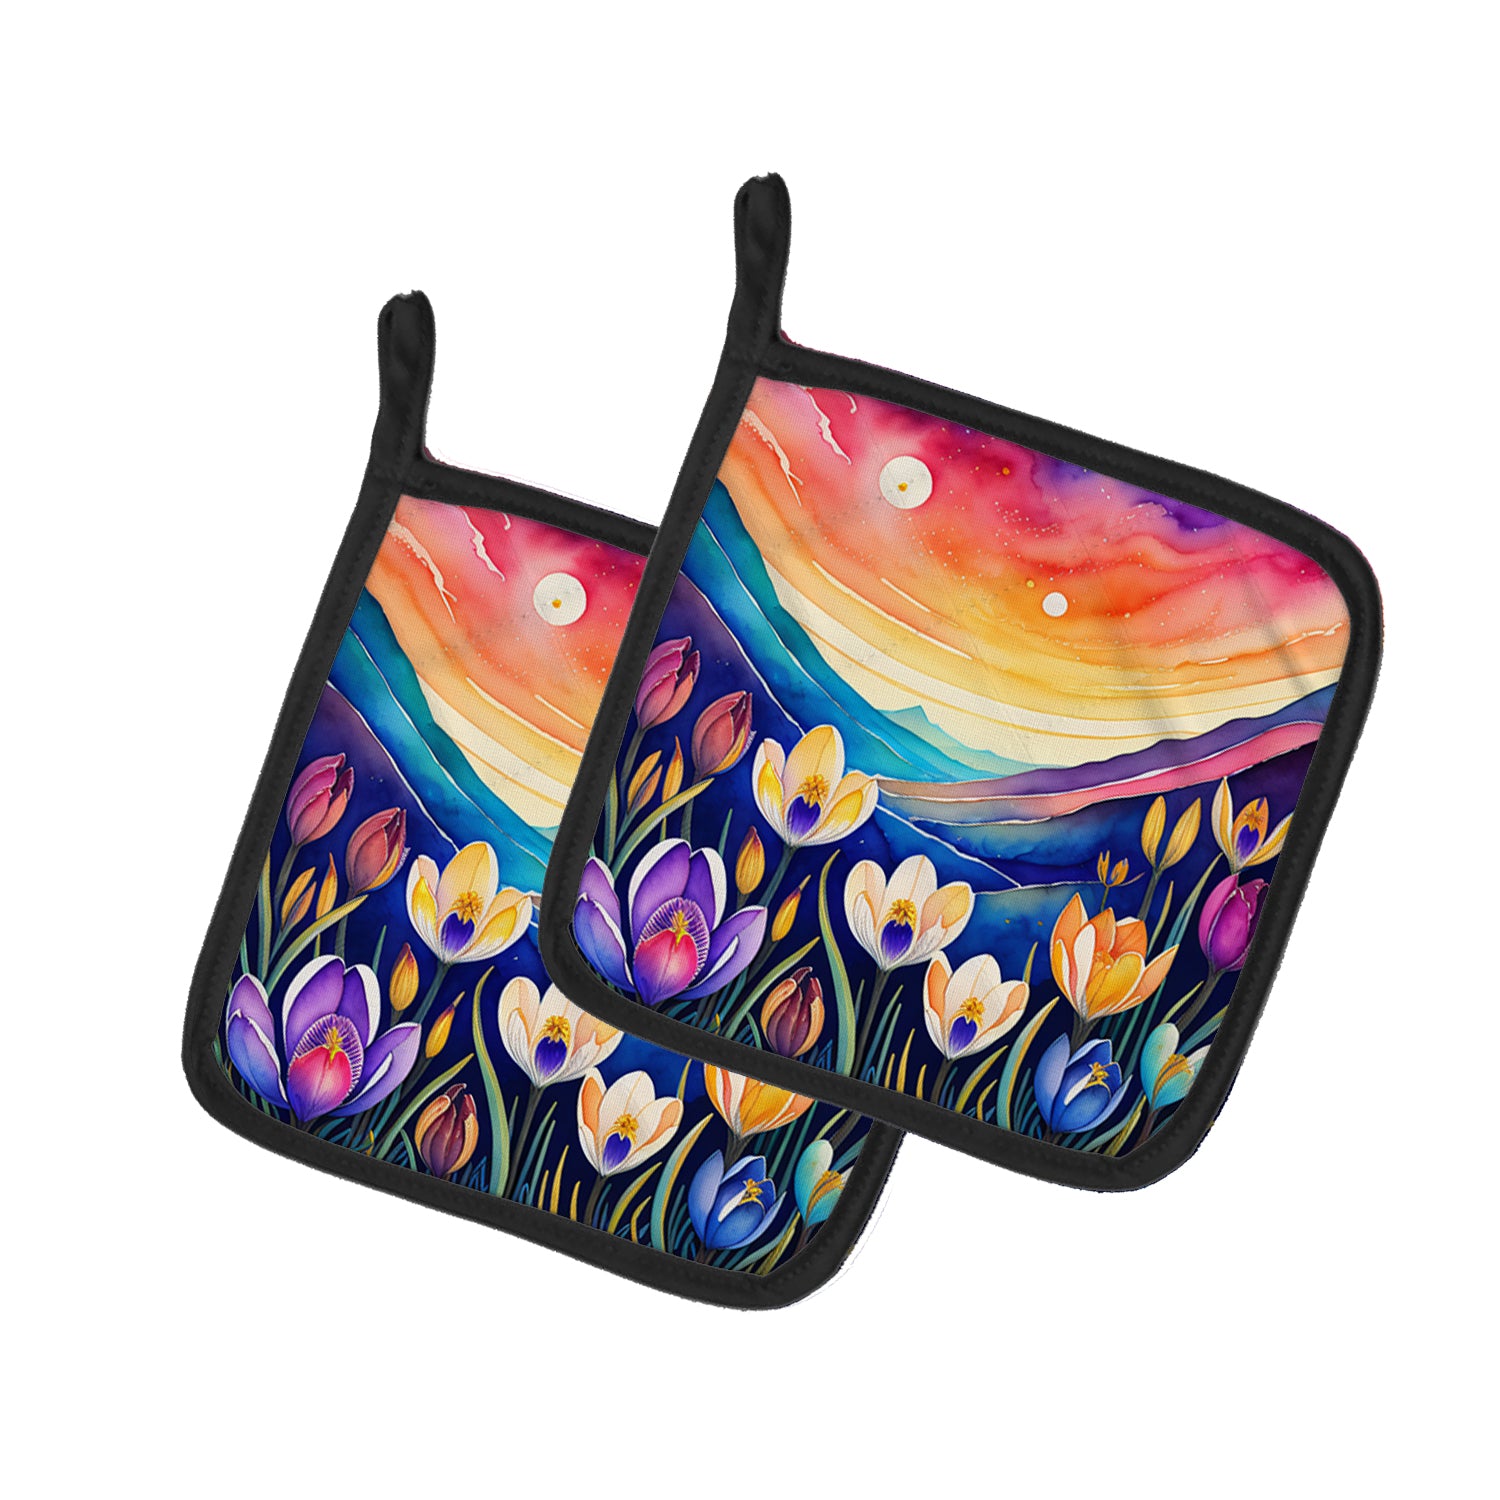 Buy this Colorful Crocus Pair of Pot Holders